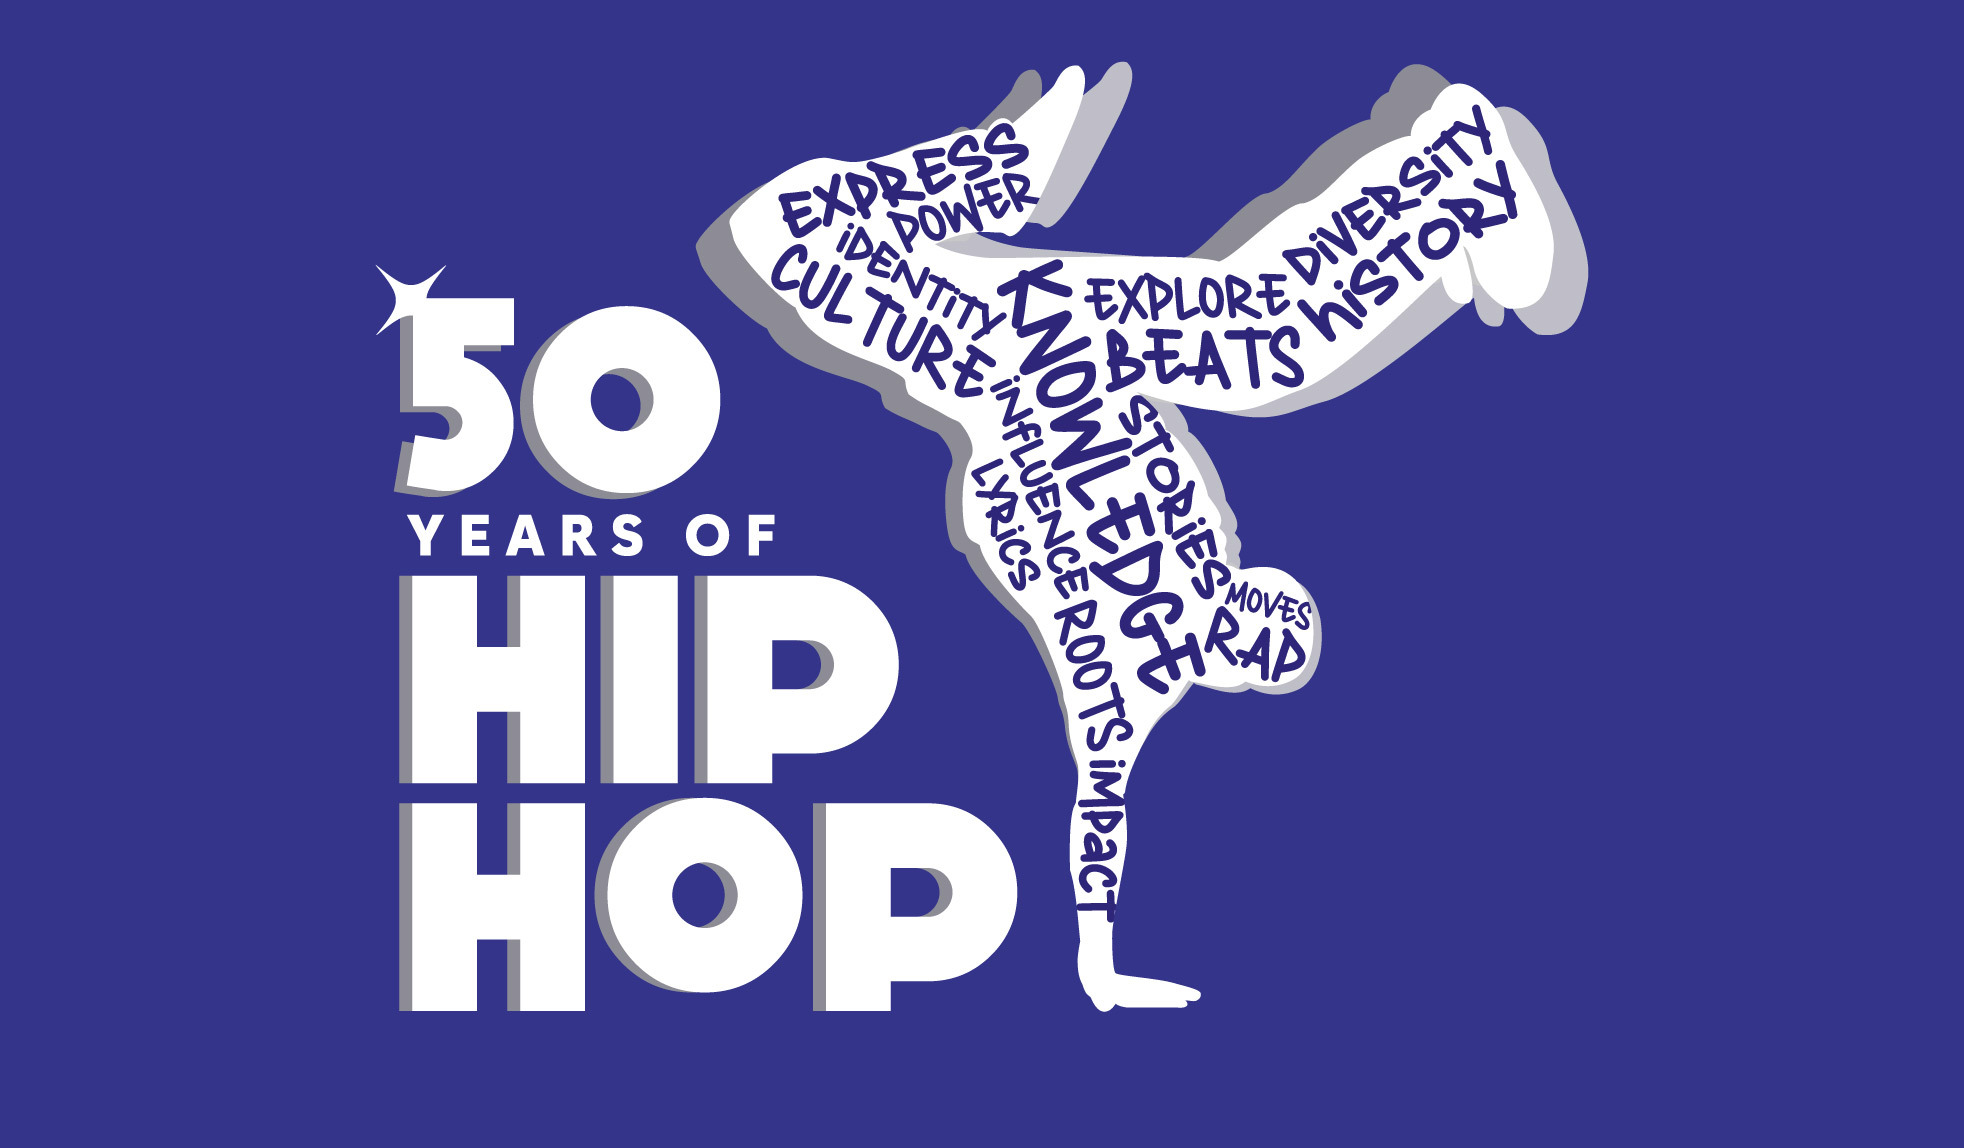 Join us and over 30 organizations across the nation as we celebrate Hip Hop's 50th Anniversary all year long!